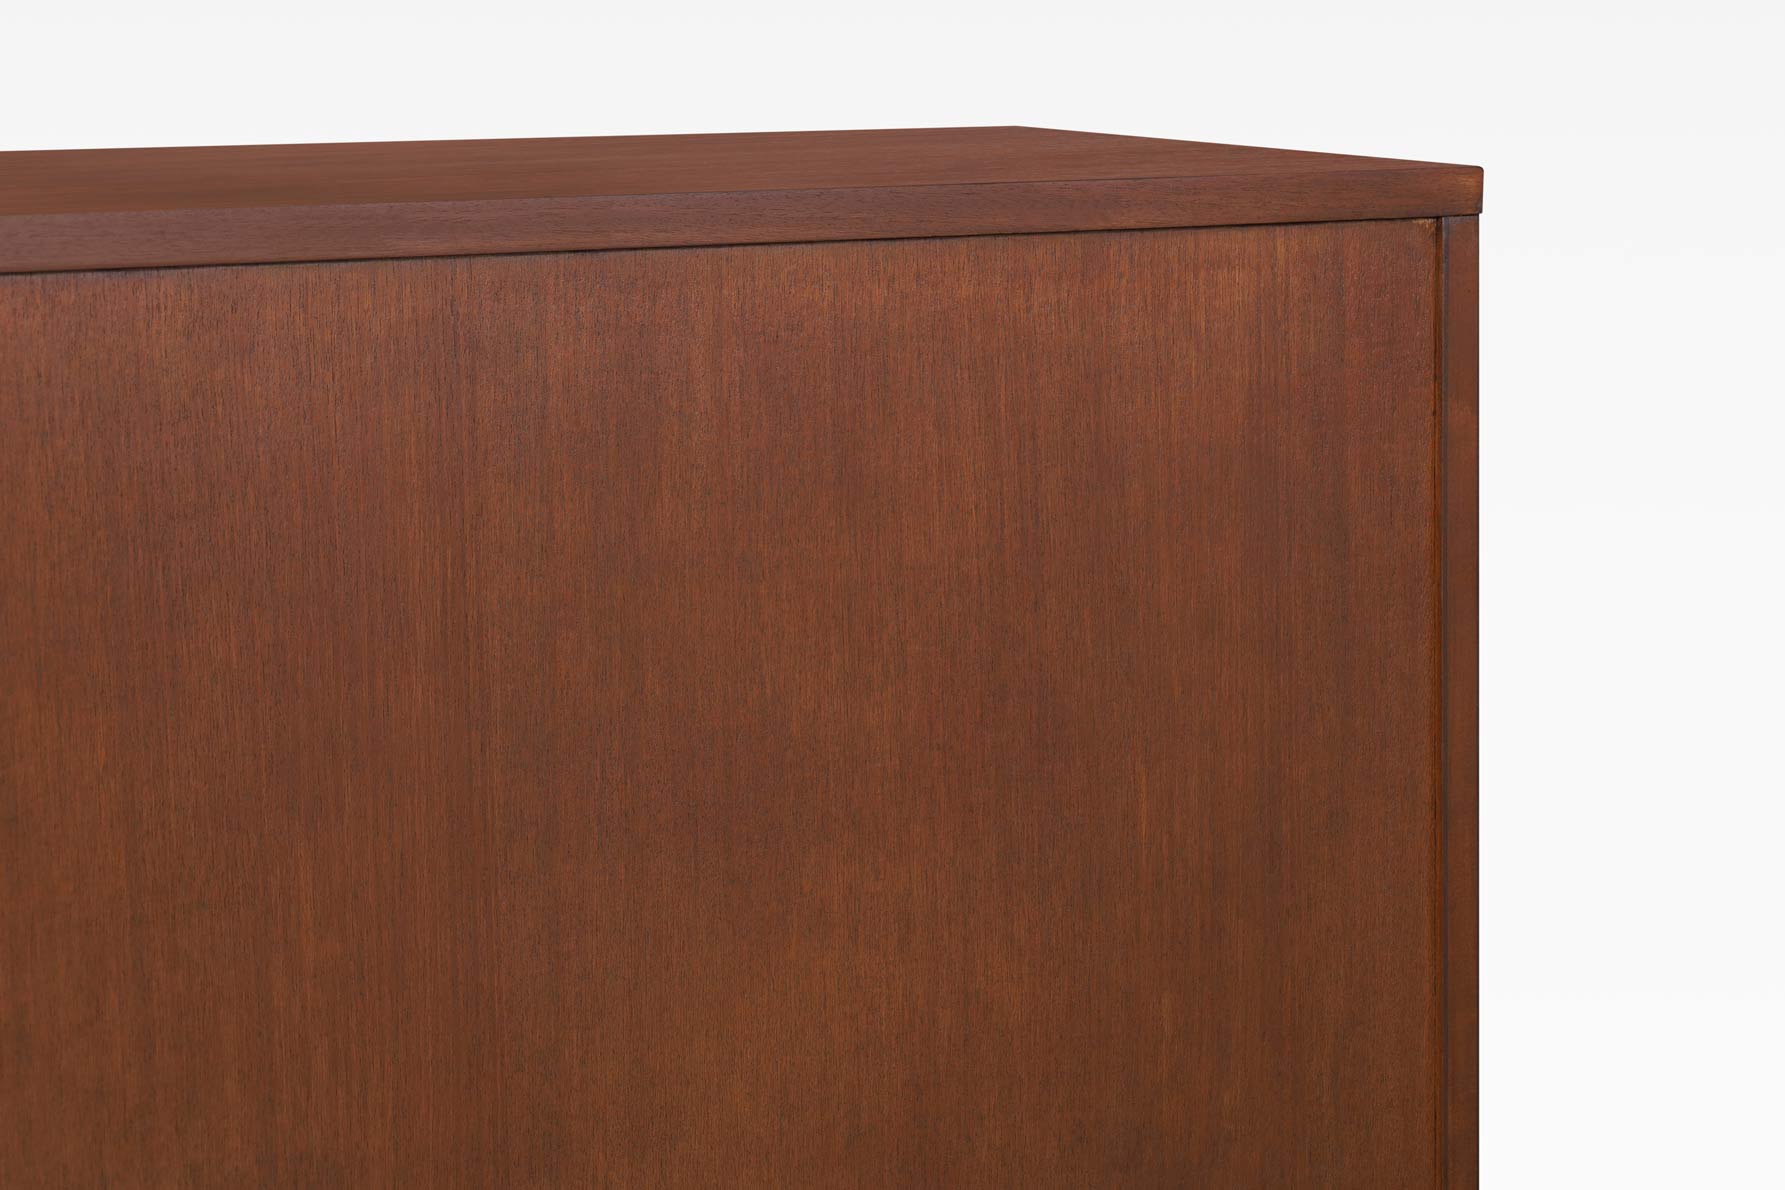 Vintage Irwin Collection Mahogany and Brass Credenza by Paul McCobb